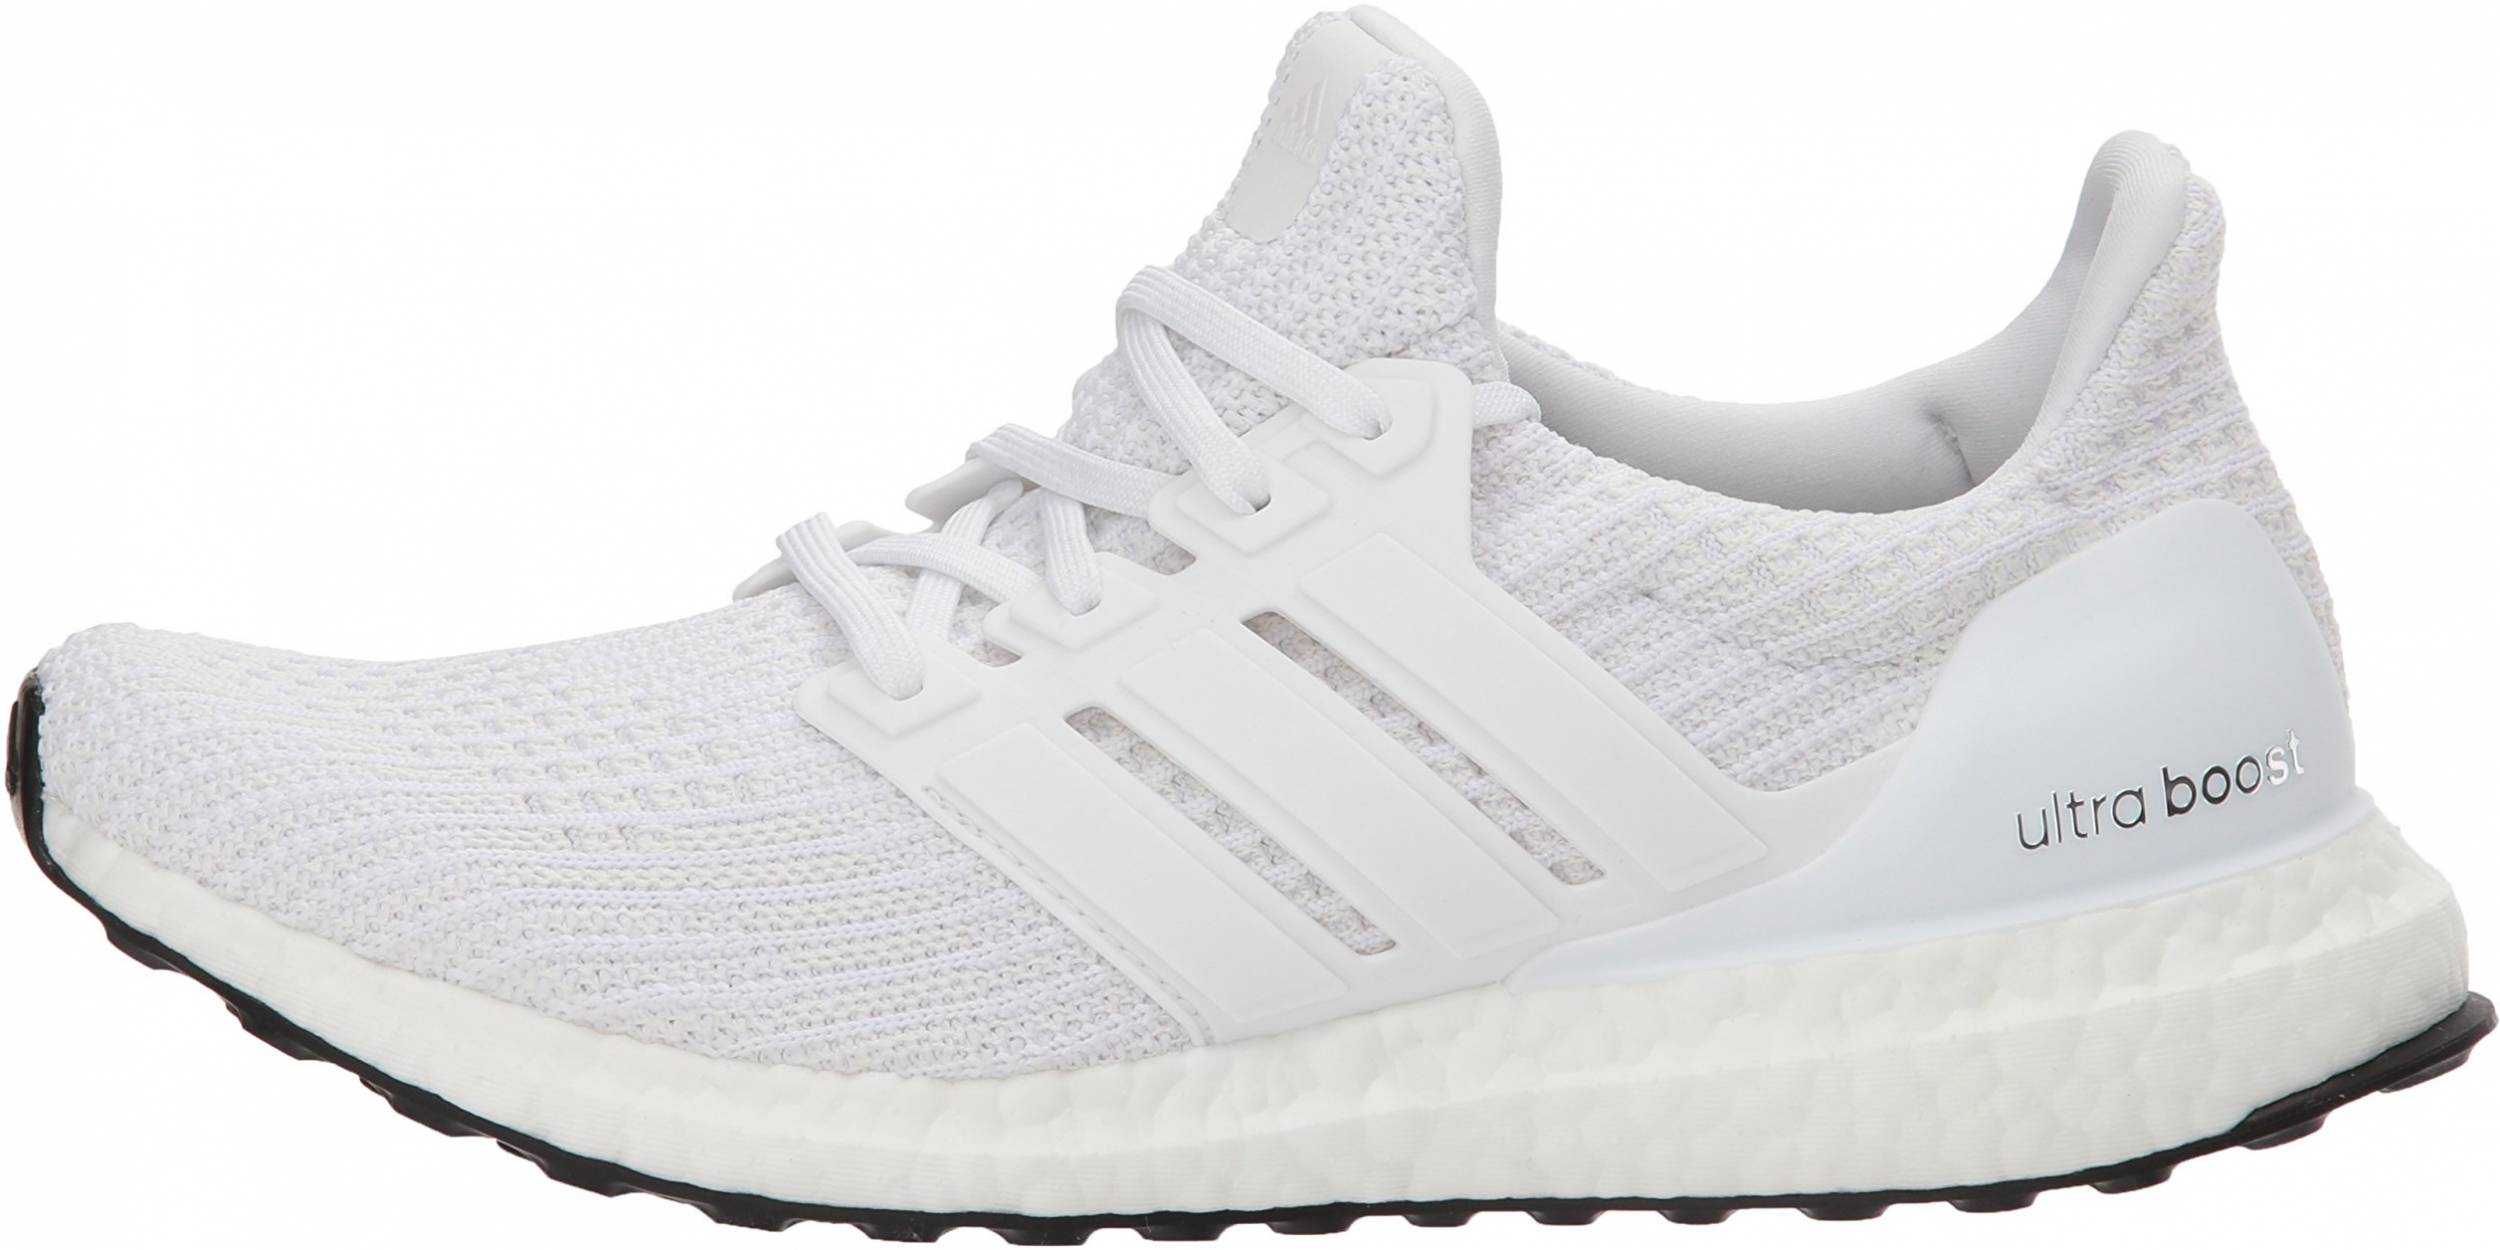 ultra boost shoes on sale